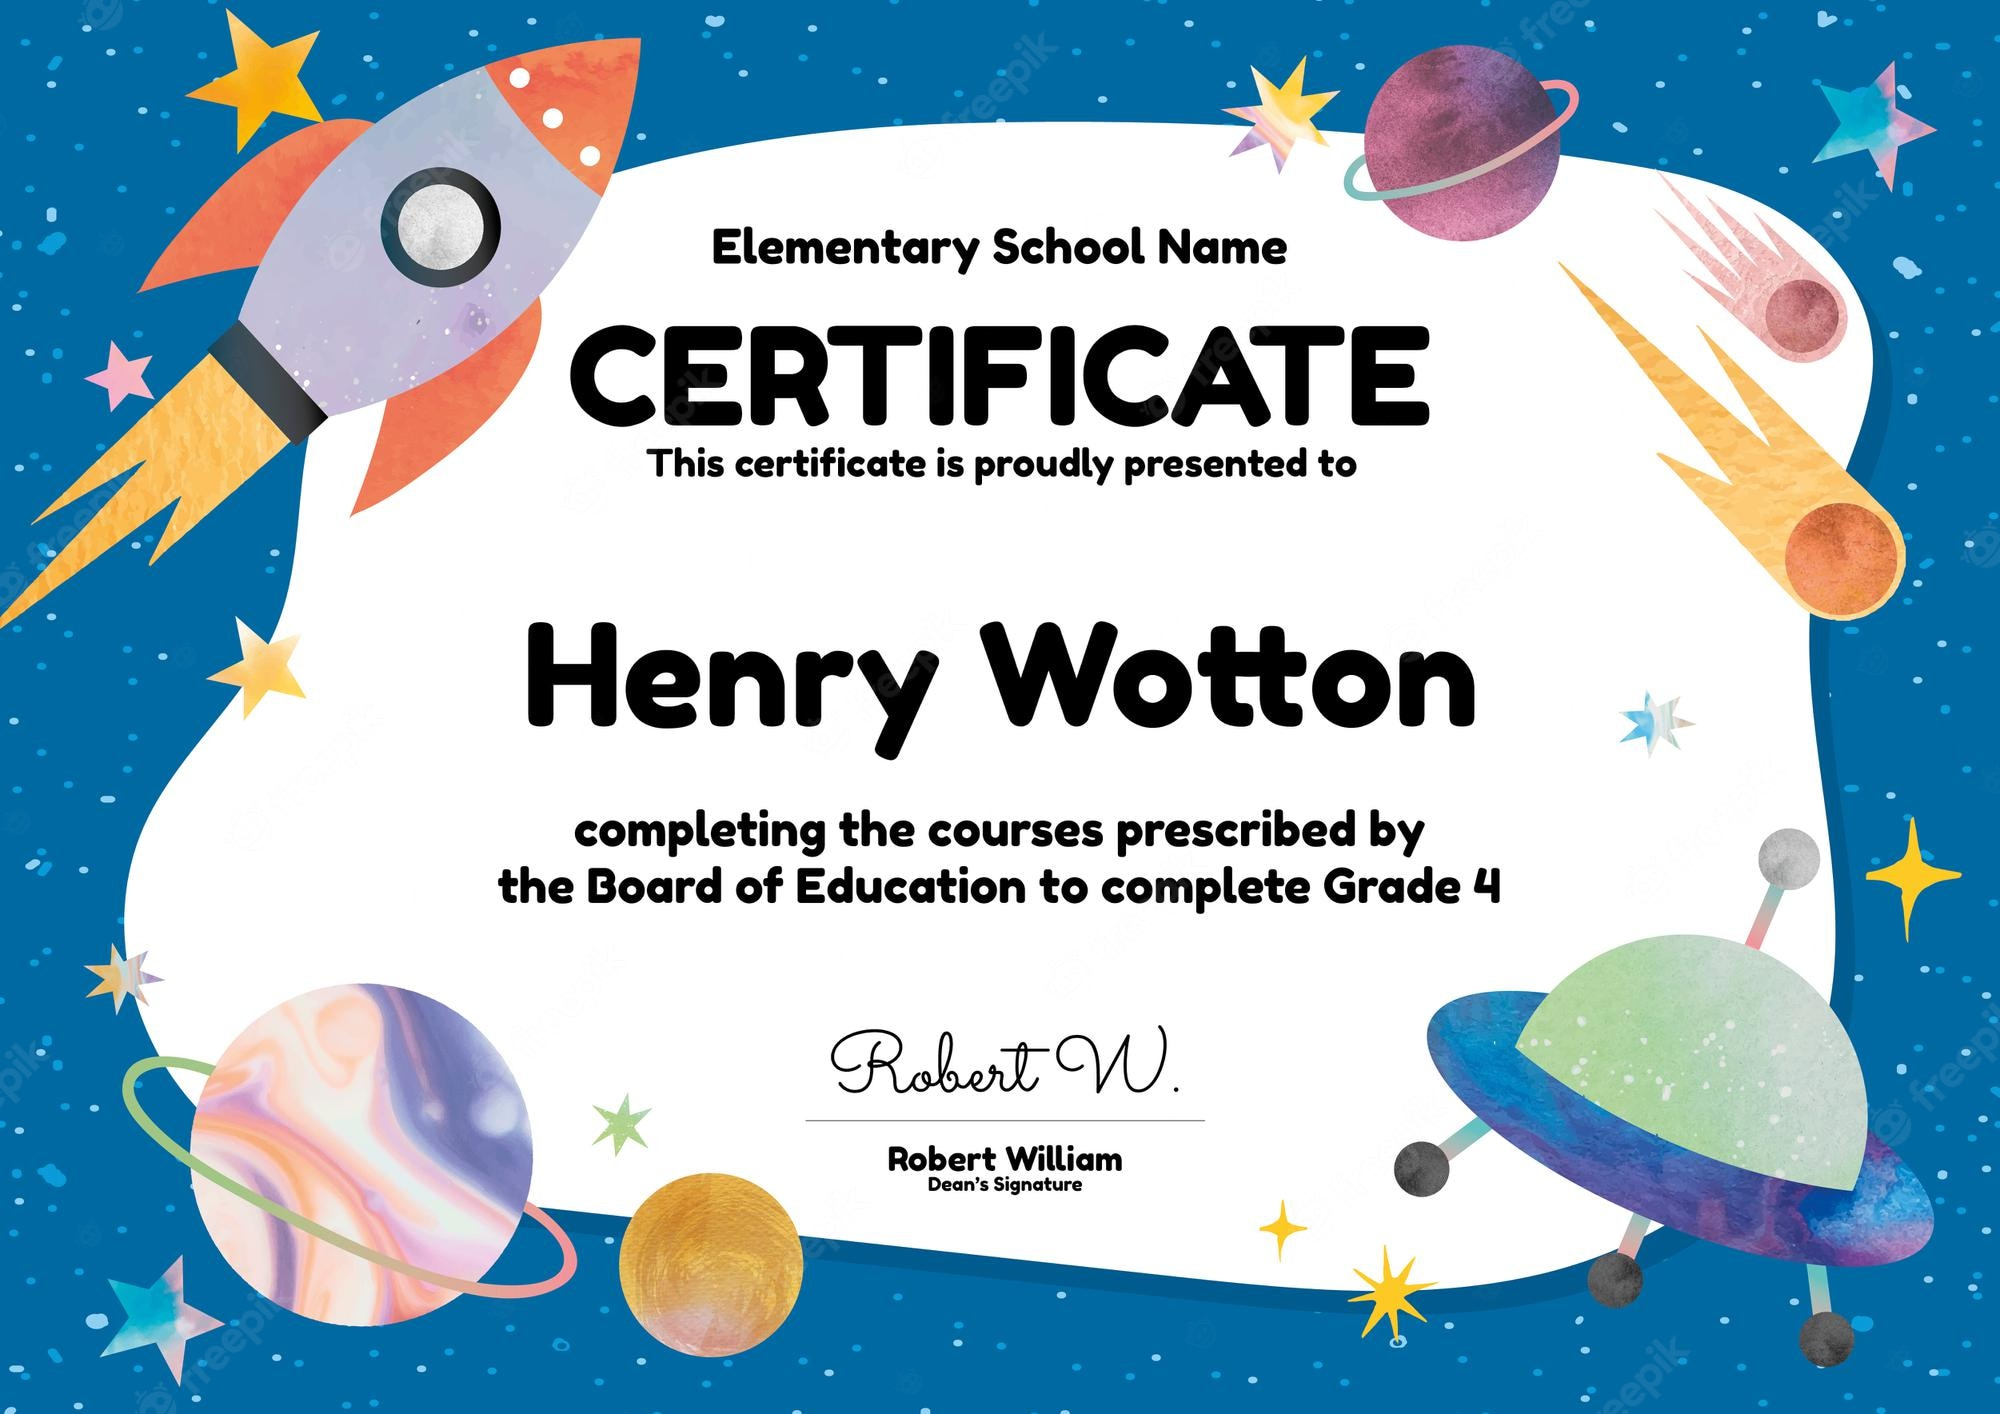 Elementary certificate Images  Free Vectors, Stock Photos & PSD Within Free Printable Certificate Templates For Kids